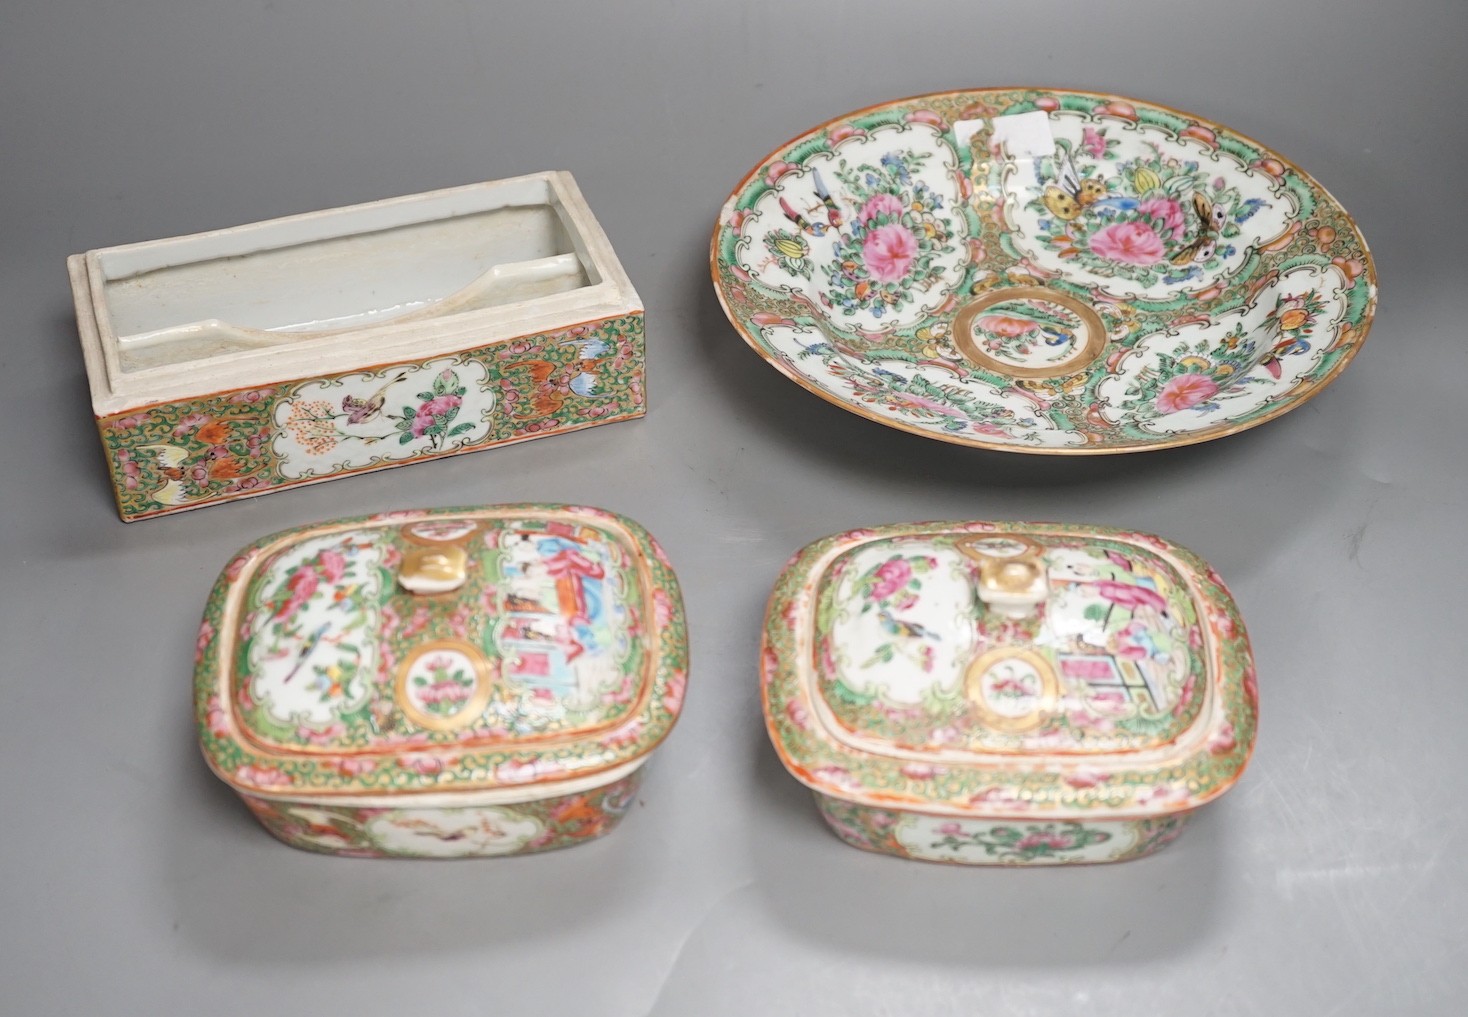 A group of 19th century Chinese famille rose porcelain - two soap dishes, strainers and covers, a plate and a pen box base